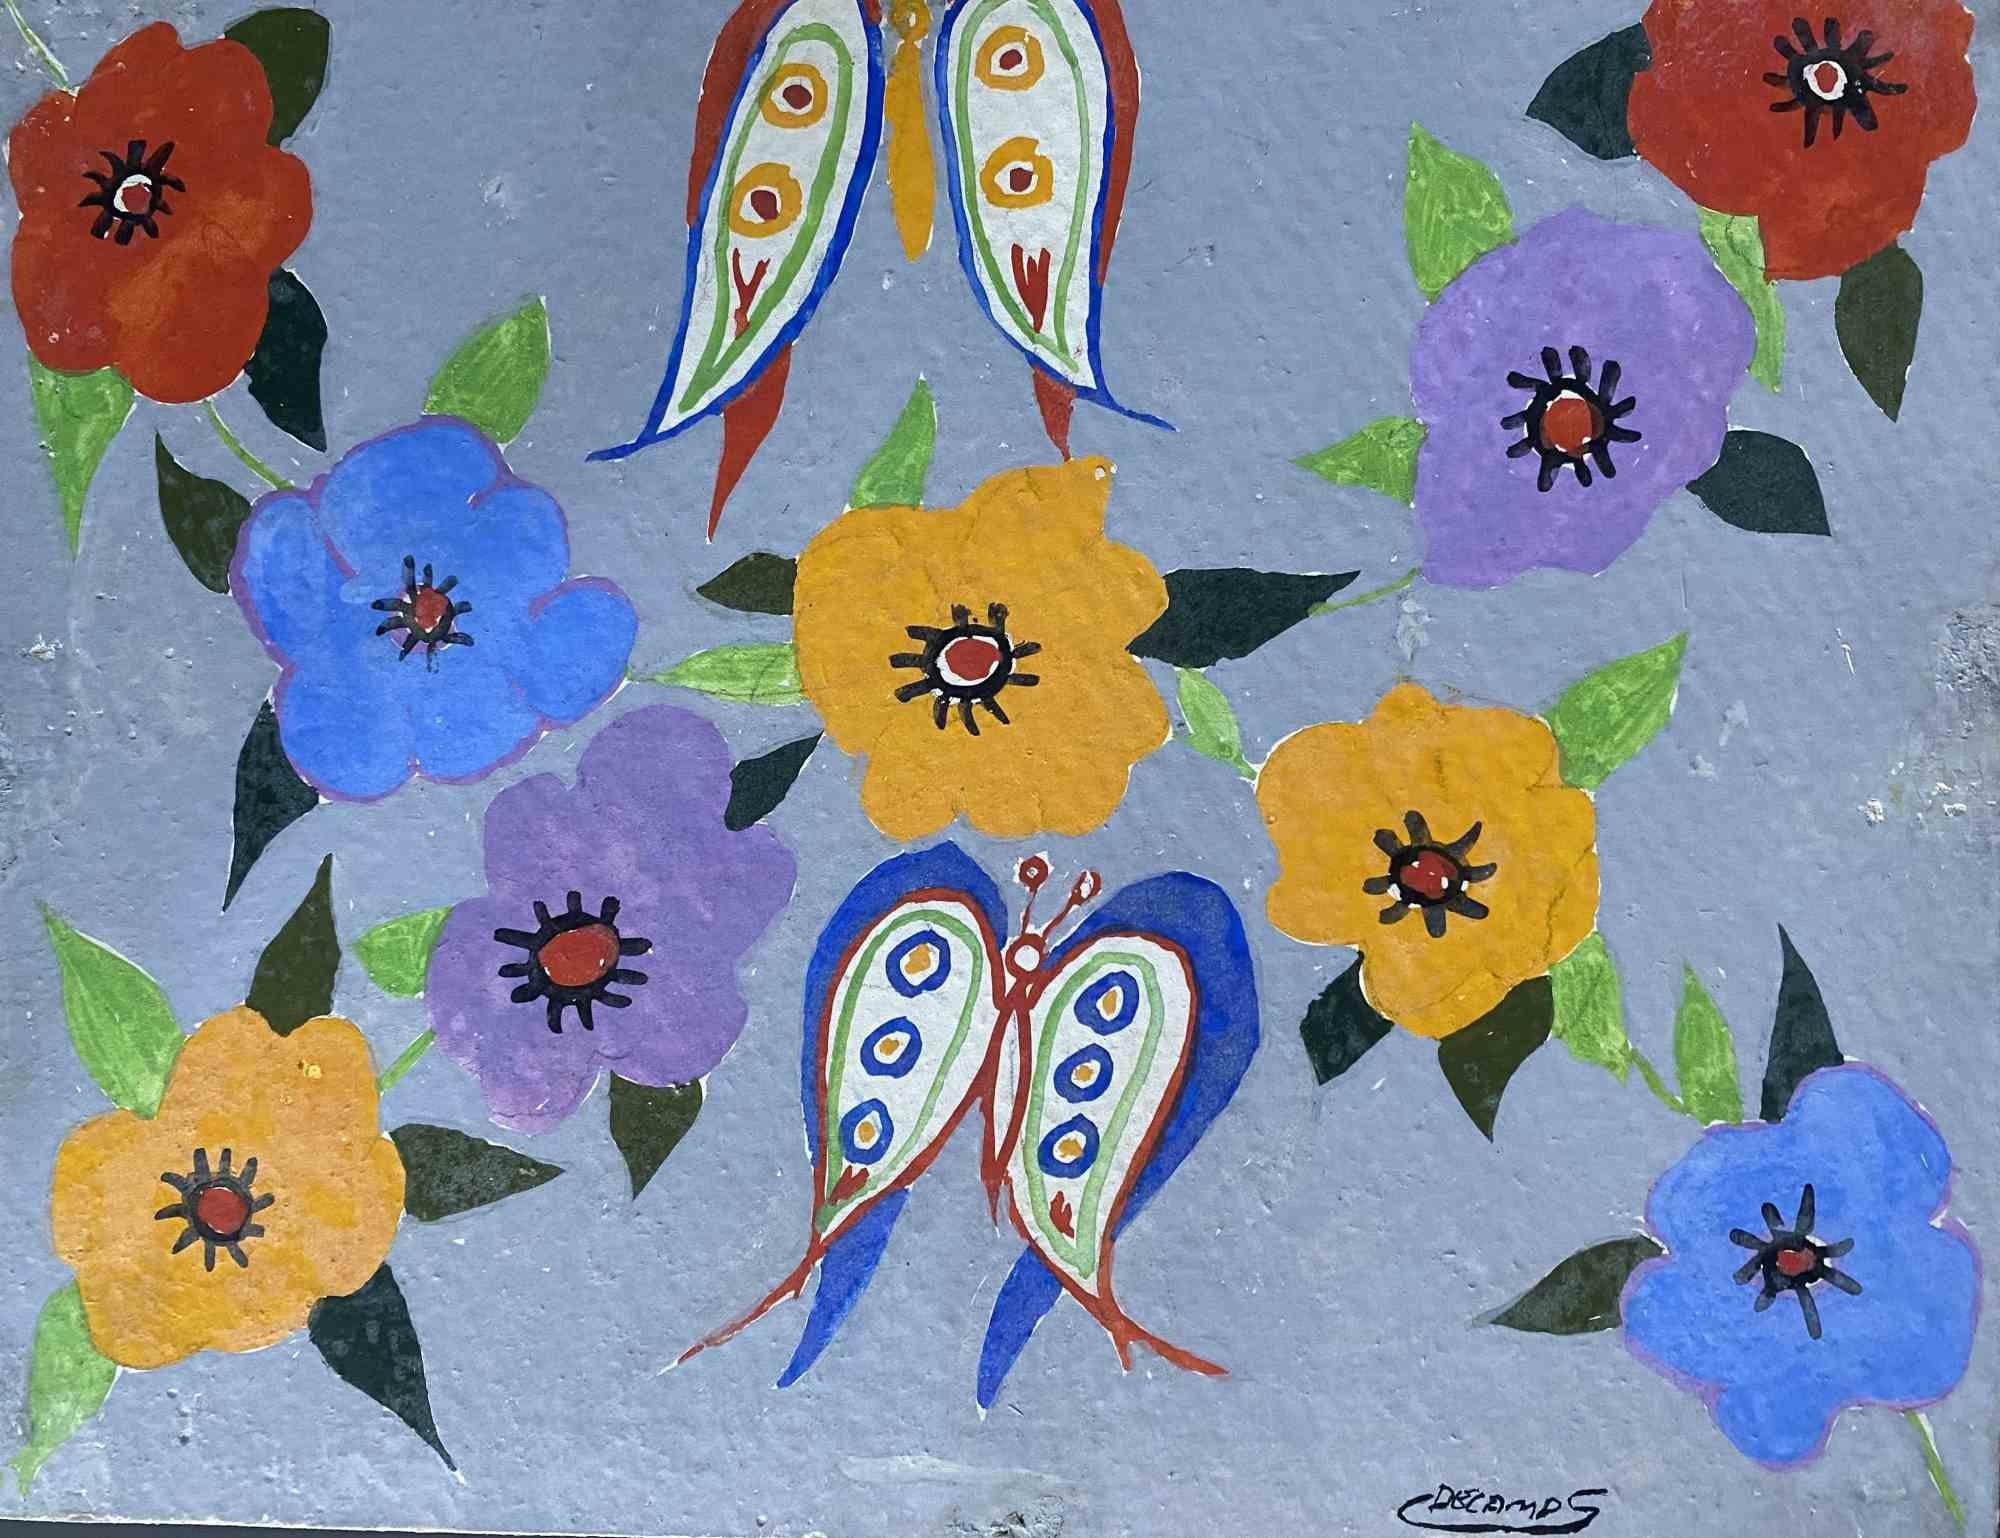 Flowers With Butterflies is a painting realized by Claude Decamps in the 1970s

Oil painting on cardboard canvas.

Hand-signed on the lower.

Good conditions.

The artwork is represented through soft brush strokes smoothly, with harmonious and